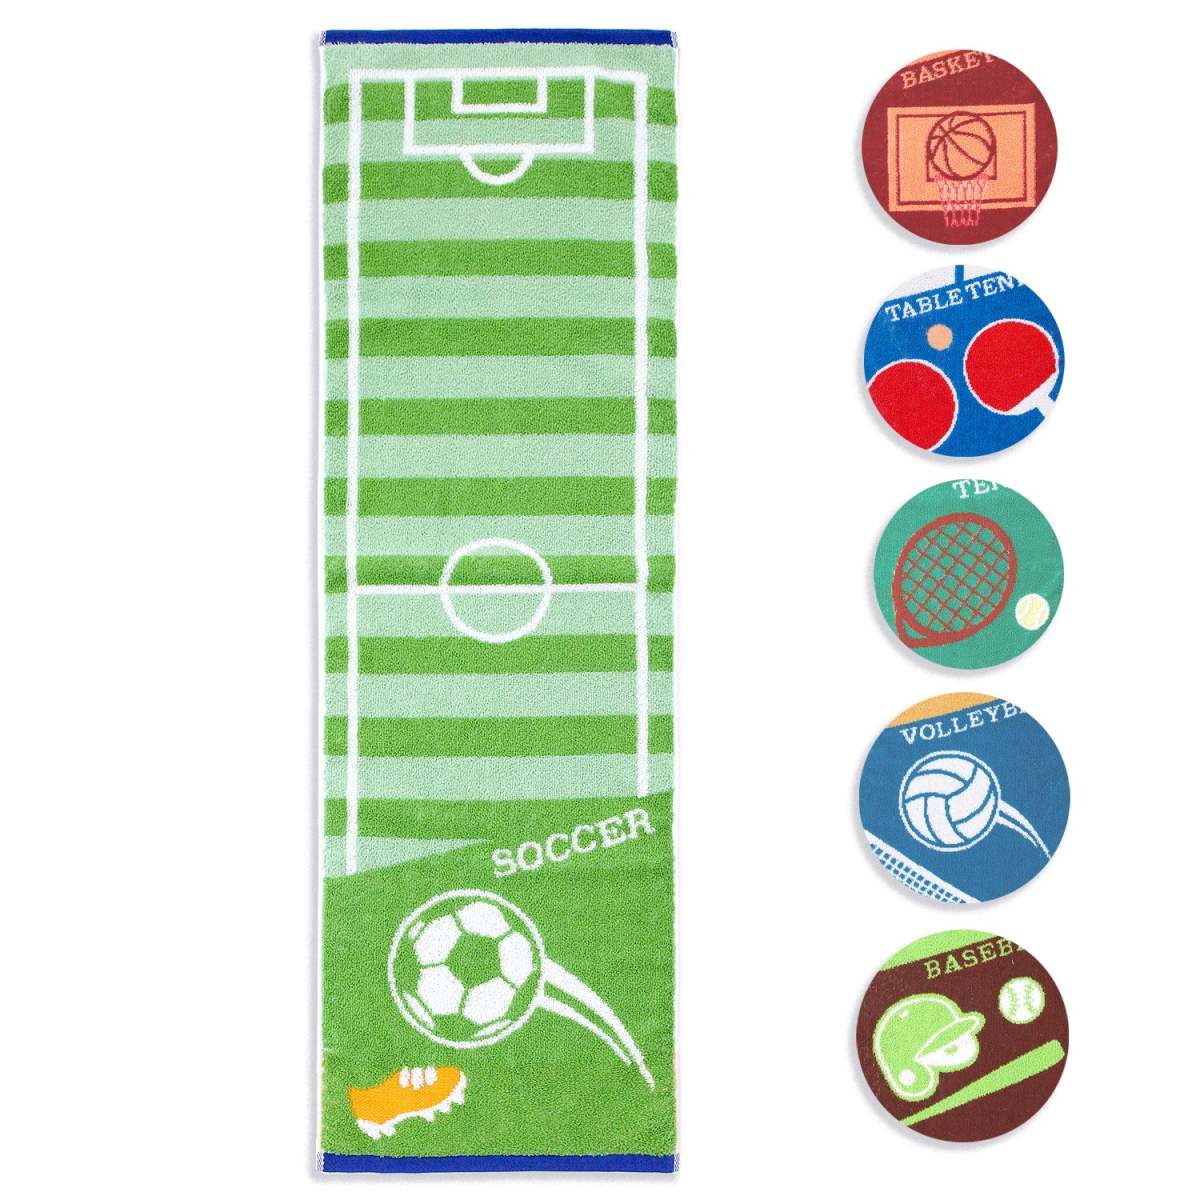  sport towel name inserting embroidery TMOC real sport towel gift present celebration present towel art gallery official 